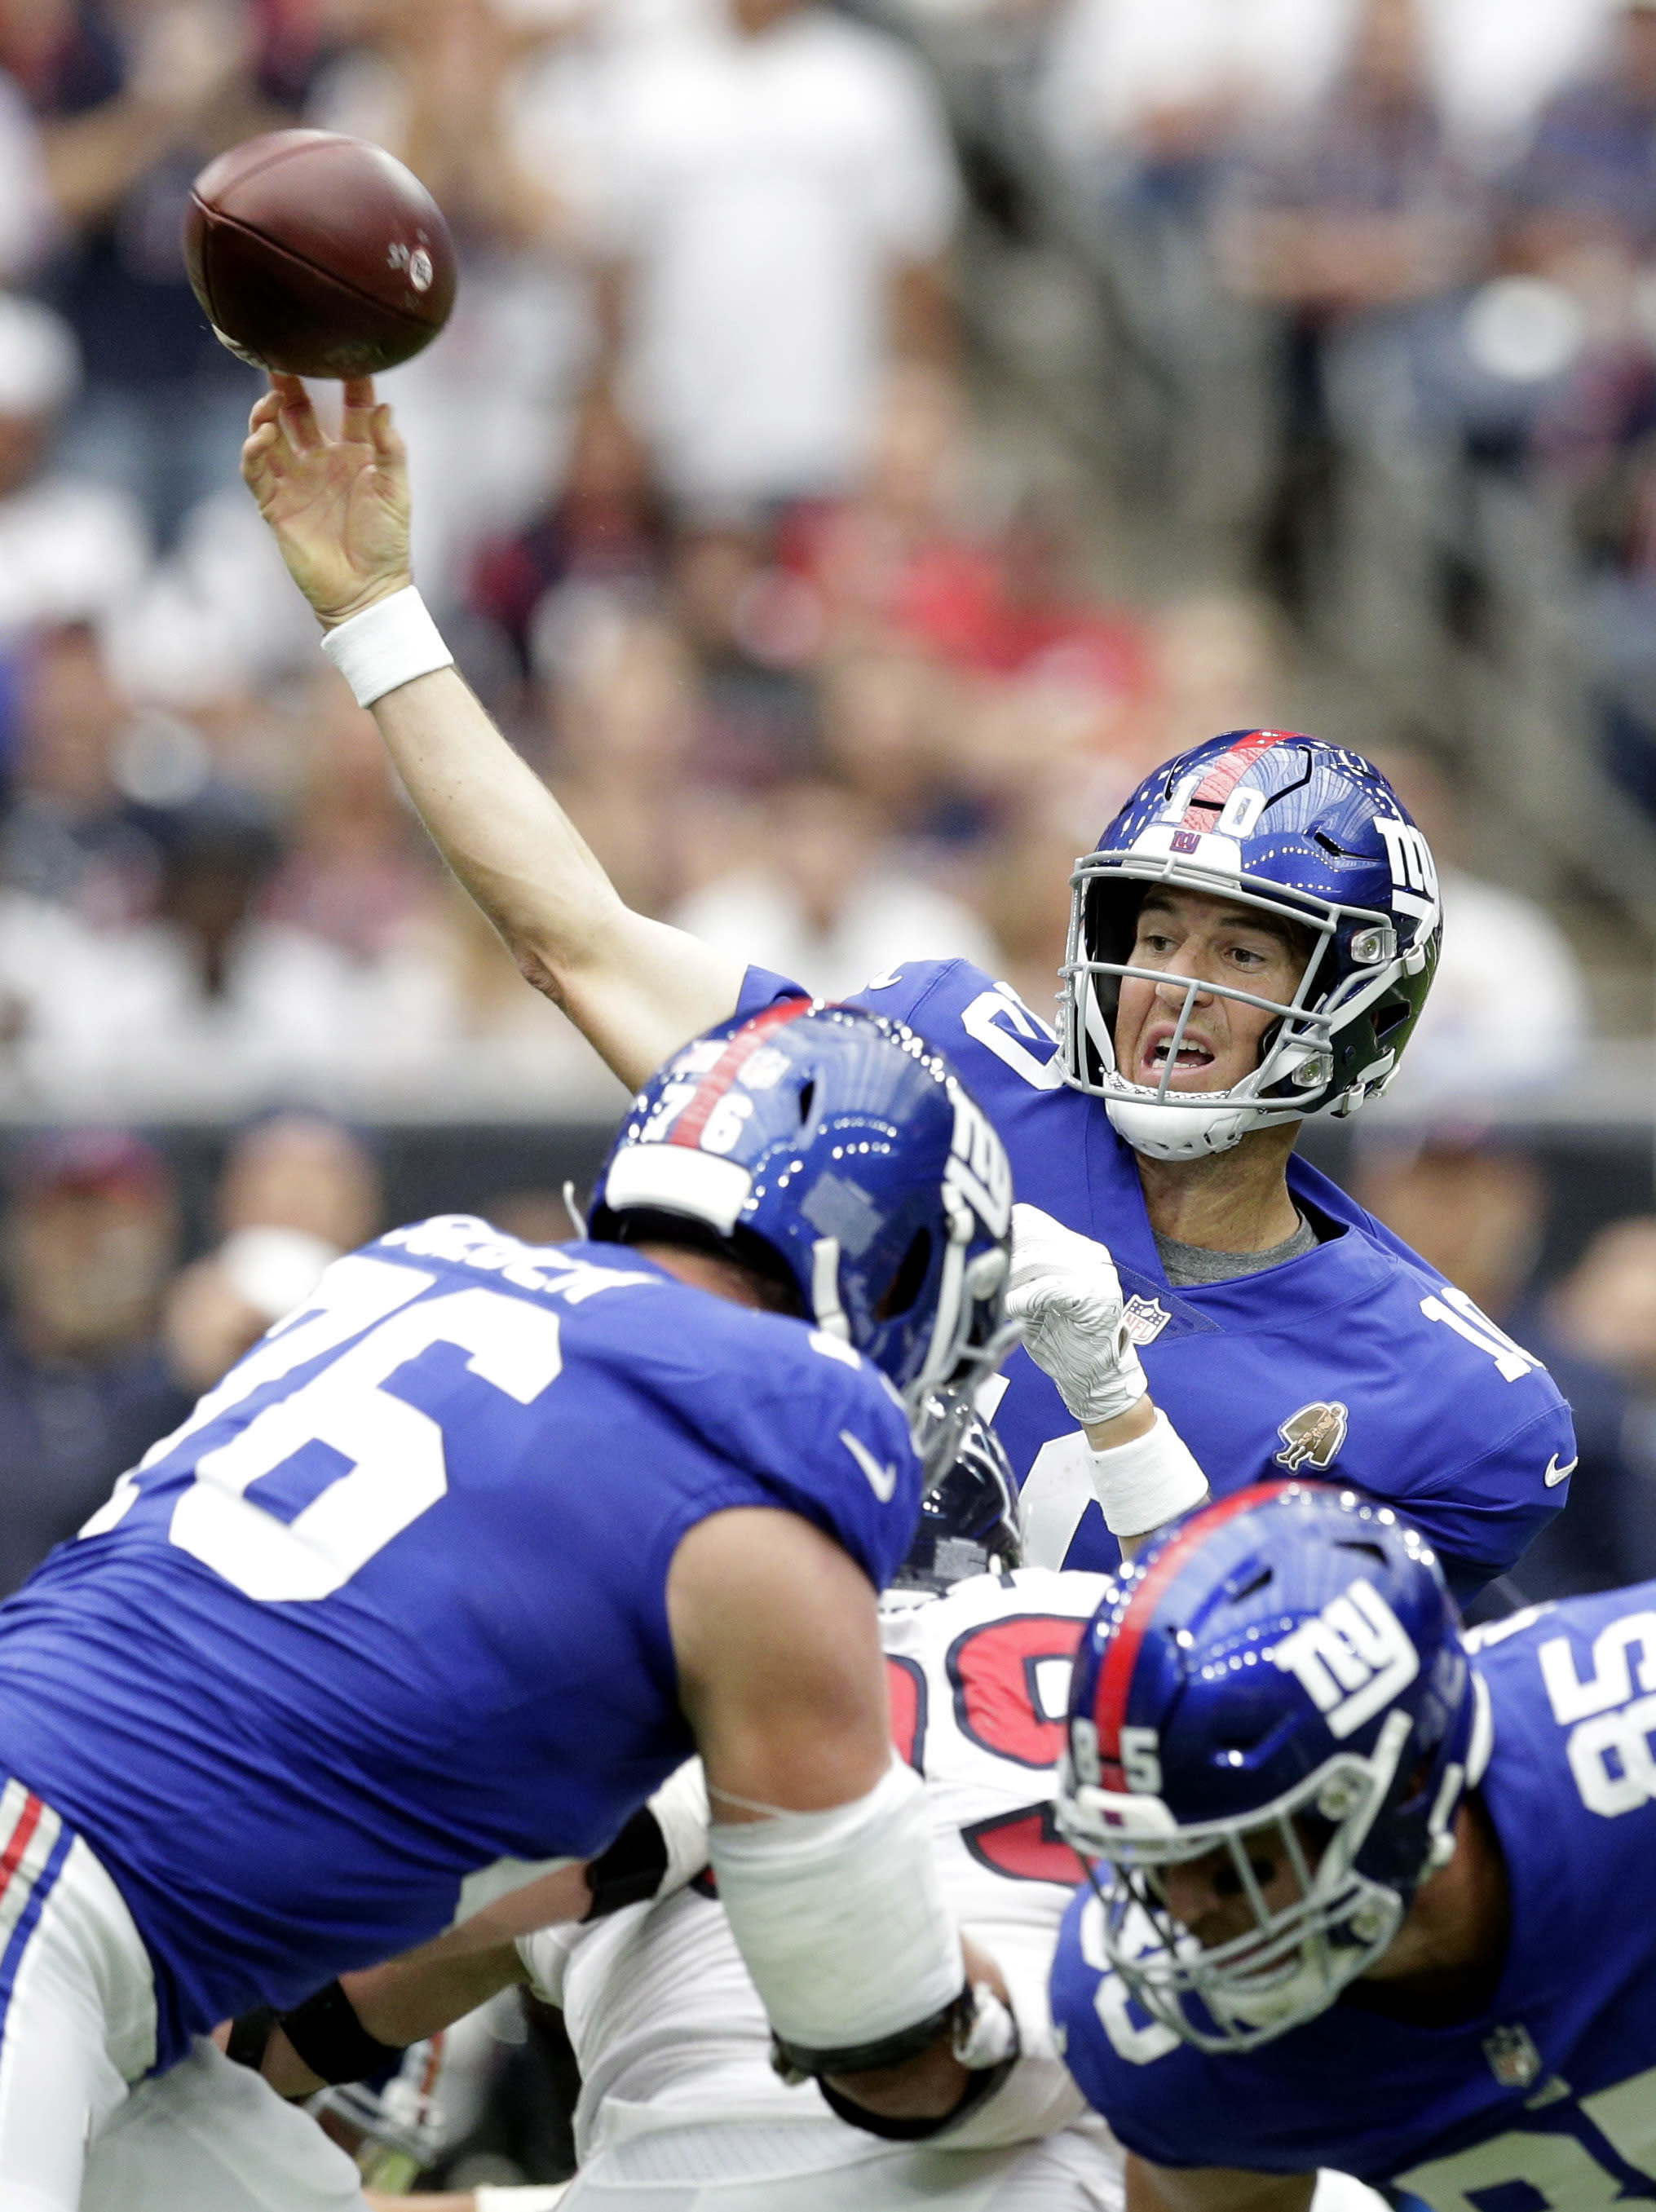 Manning throws 2 TDs as Giants beat Texans 2722 for 1st win